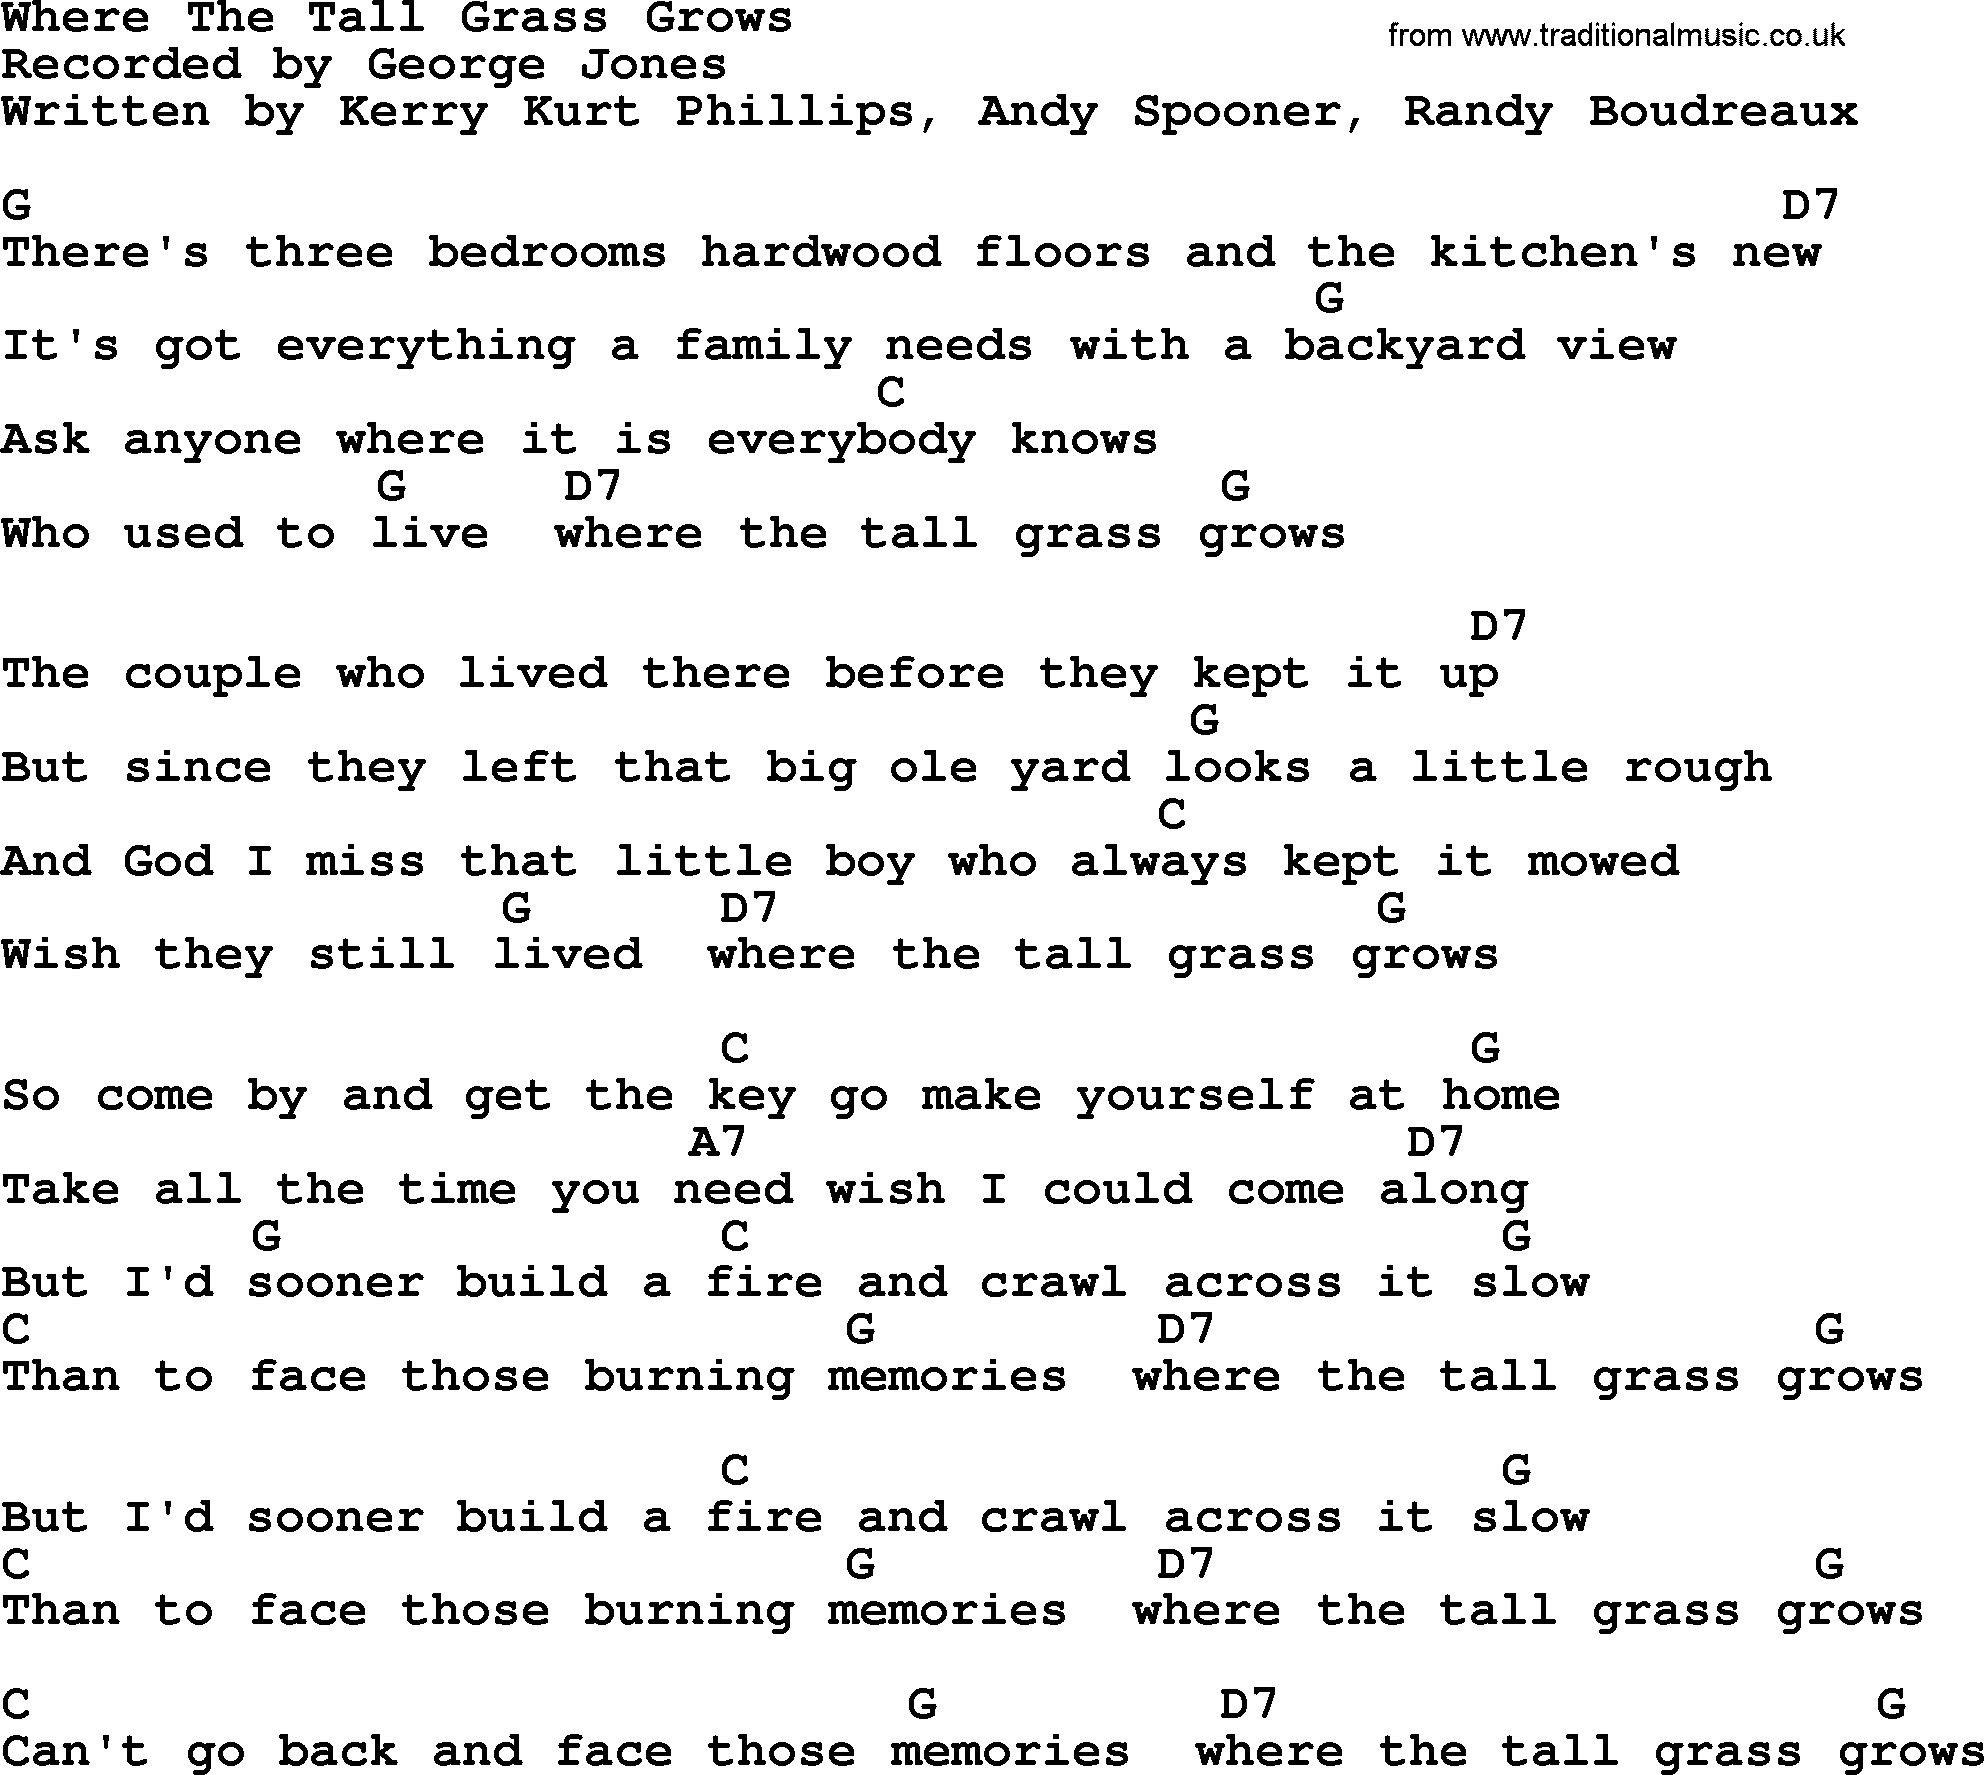 George Jones song: Where The Tall Grass Grows, lyrics and chords